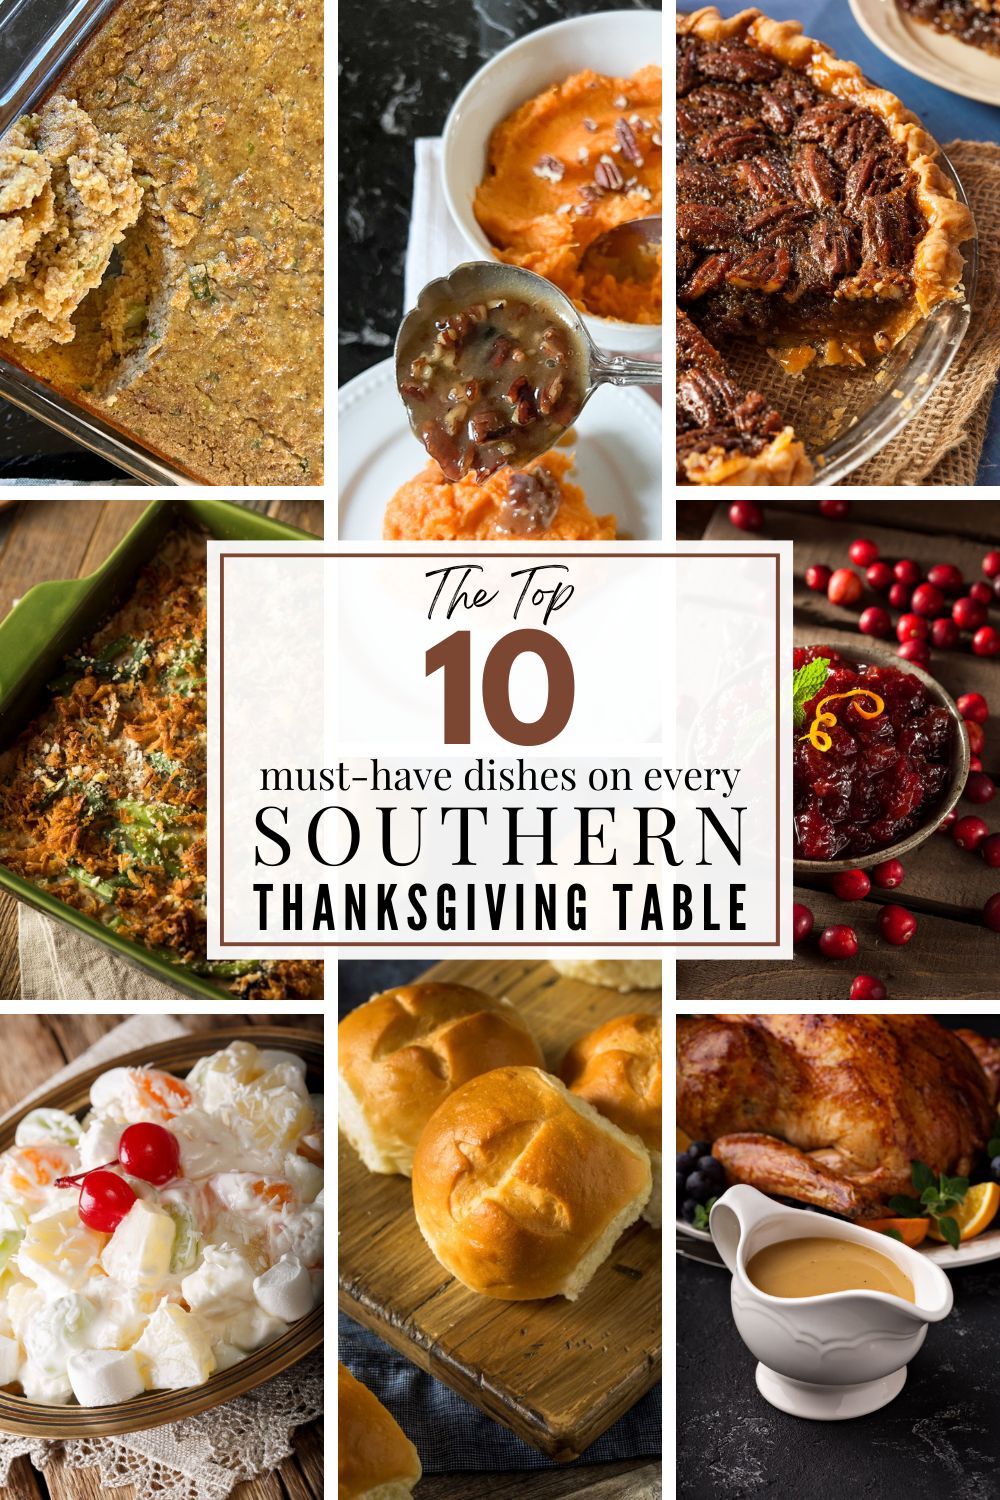 The Top Ten Must-Have Dishes on Every Southern Thanksgiving Table